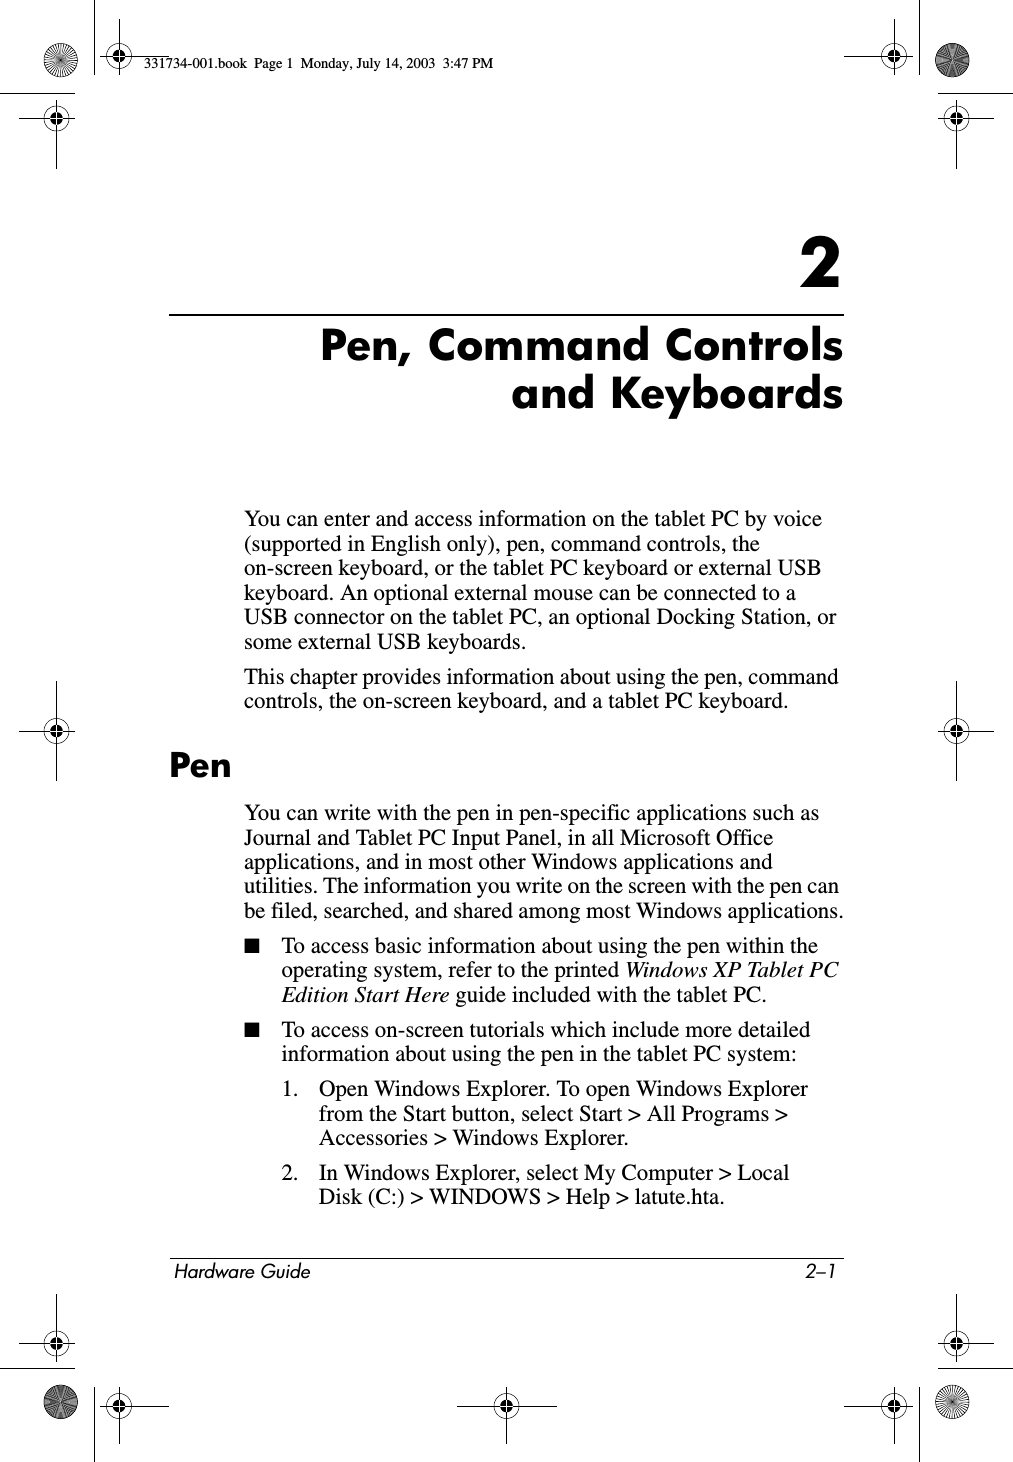 Hardware Guide 2–12Pen, Command Controlsand KeyboardsYou can enter and access information on the tablet PC by voice (supported in English only), pen, command controls, the on-screen keyboard, or the tablet PC keyboard or external USB keyboard. An optional external mouse can be connected to a USB connector on the tablet PC, an optional Docking Station, or some external USB keyboards.This chapter provides information about using the pen, command controls, the on-screen keyboard, and a tablet PC keyboard.PenYou can write with the pen in pen-specific applications such as Journal and Tablet PC Input Panel, in all Microsoft Office applications, and in most other Windows applications and utilities. The information you write on the screen with the pen can be filed, searched, and shared among most Windows applications.■To access basic information about using the pen within the operating system, refer to the printed Windows XP Tablet PC Edition Start Here guide included with the tablet PC.■To access on-screen tutorials which include more detailed information about using the pen in the tablet PC system:1. Open Windows Explorer. To open Windows Explorer from the Start button, select Start &gt; All Programs &gt; Accessories &gt; Windows Explorer.2. In Windows Explorer, select My Computer &gt; Local Disk (C:) &gt; WINDOWS &gt; Help &gt; latute.hta.331734-001.book  Page 1  Monday, July 14, 2003  3:47 PM